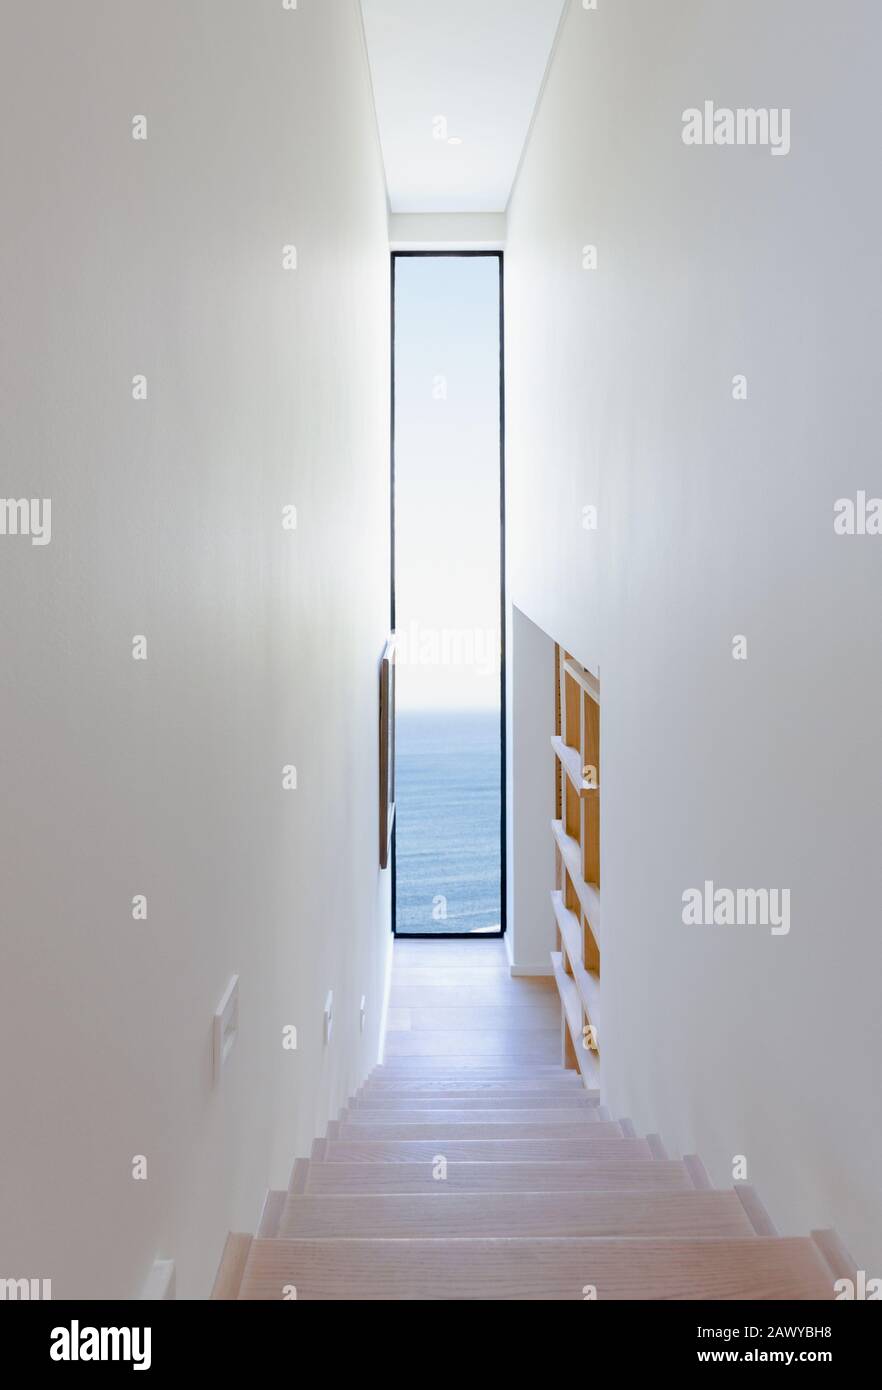 Stairwell facing long window with ocean view in modern, luxury home showcase interior Stock Photo